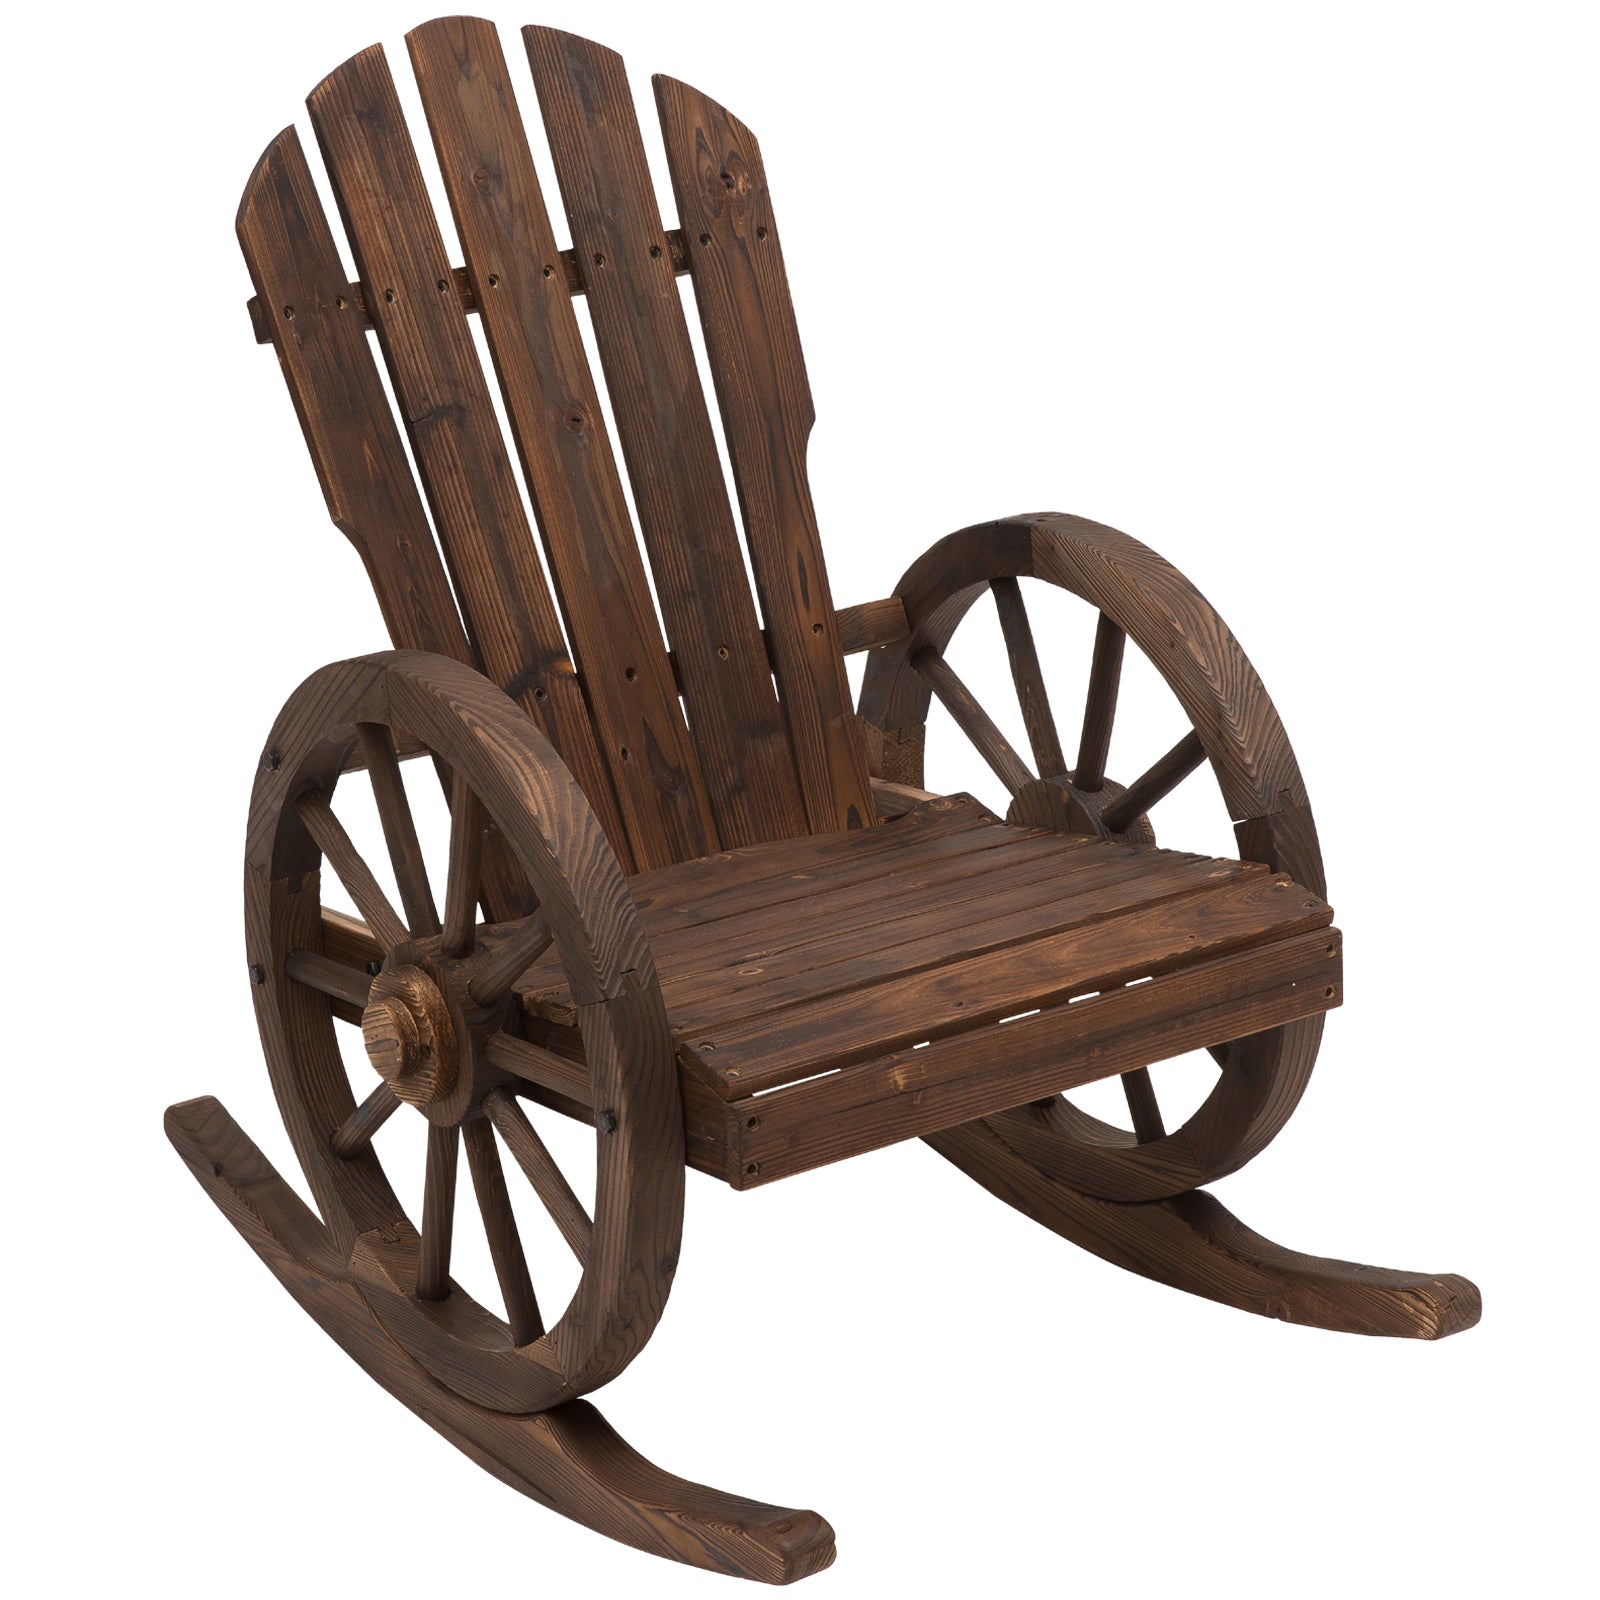 Outsunny Adirondack Rocking Chair Porch Poolside Garden Lounging Carbonized Wood  | TJ Hughes